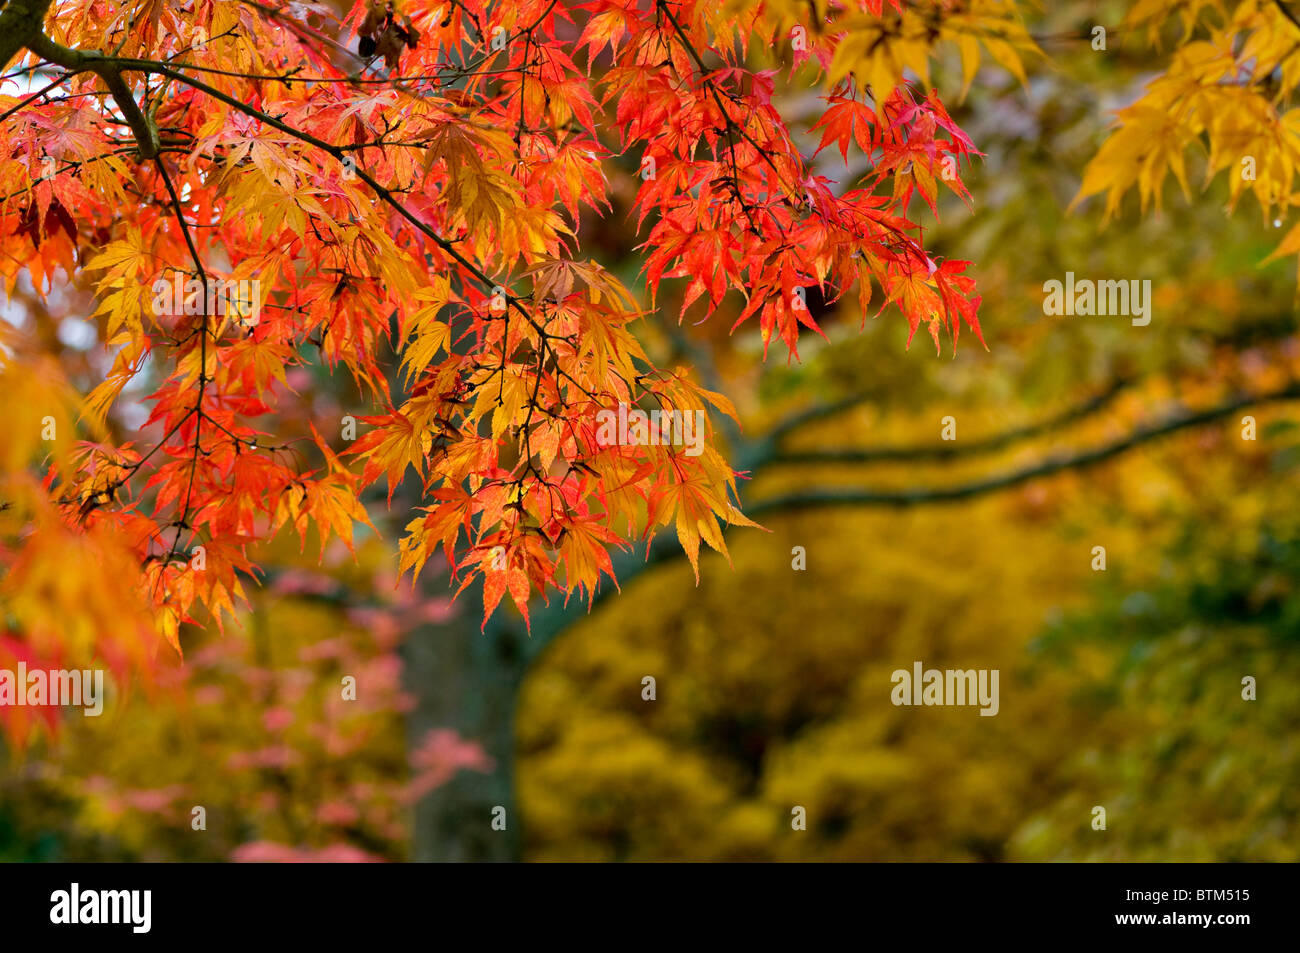 Close-up image of the vibrant Autumn/Fall coloured leaves of Acer Palmatum the Japanese Maple tree, image taken against a soft background. Stock Photo